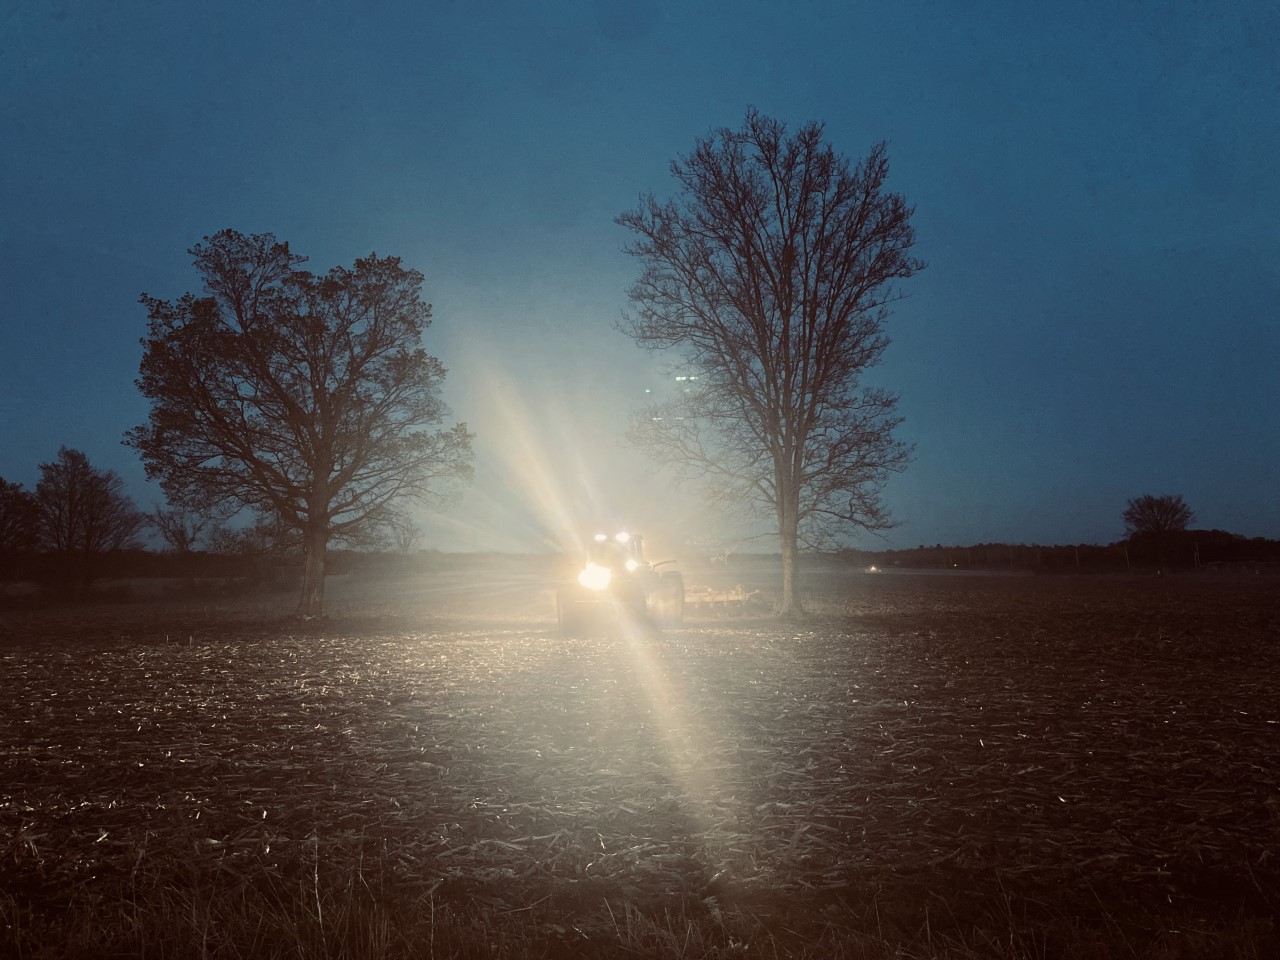 Tractor at night in a field